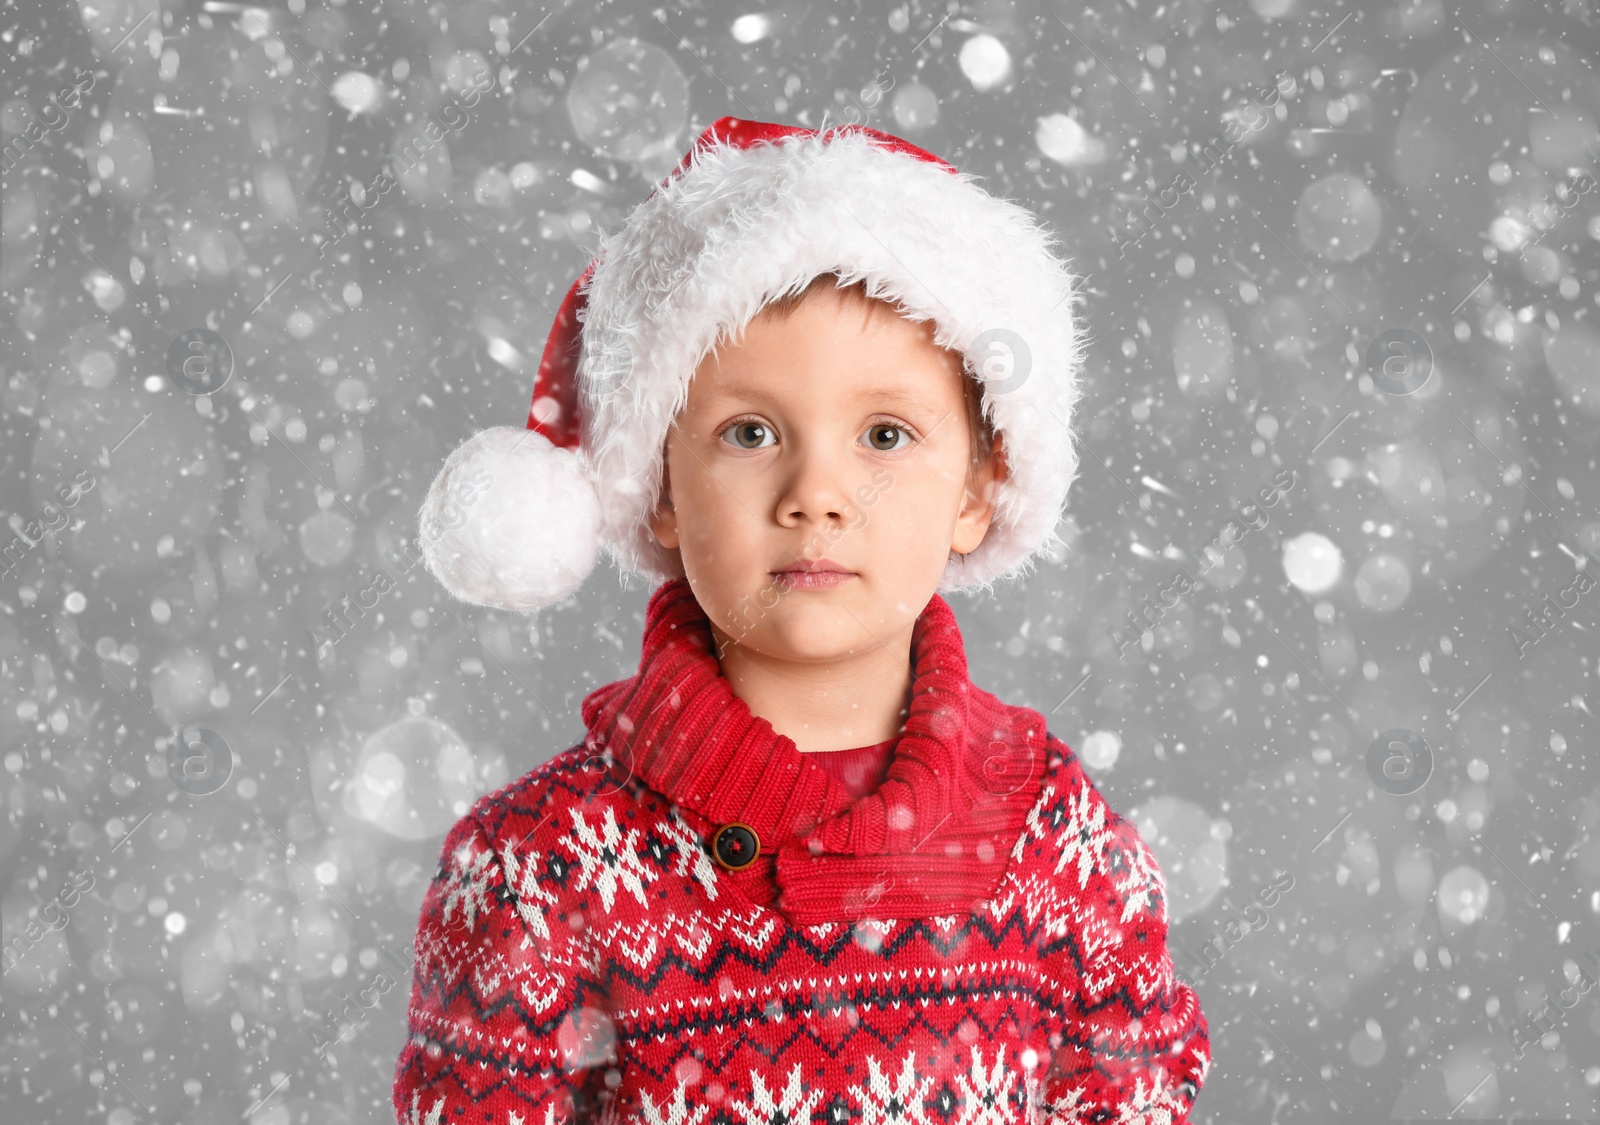 Image of Cute child in Santa hat under snowfall on grey background. Christmas celebration